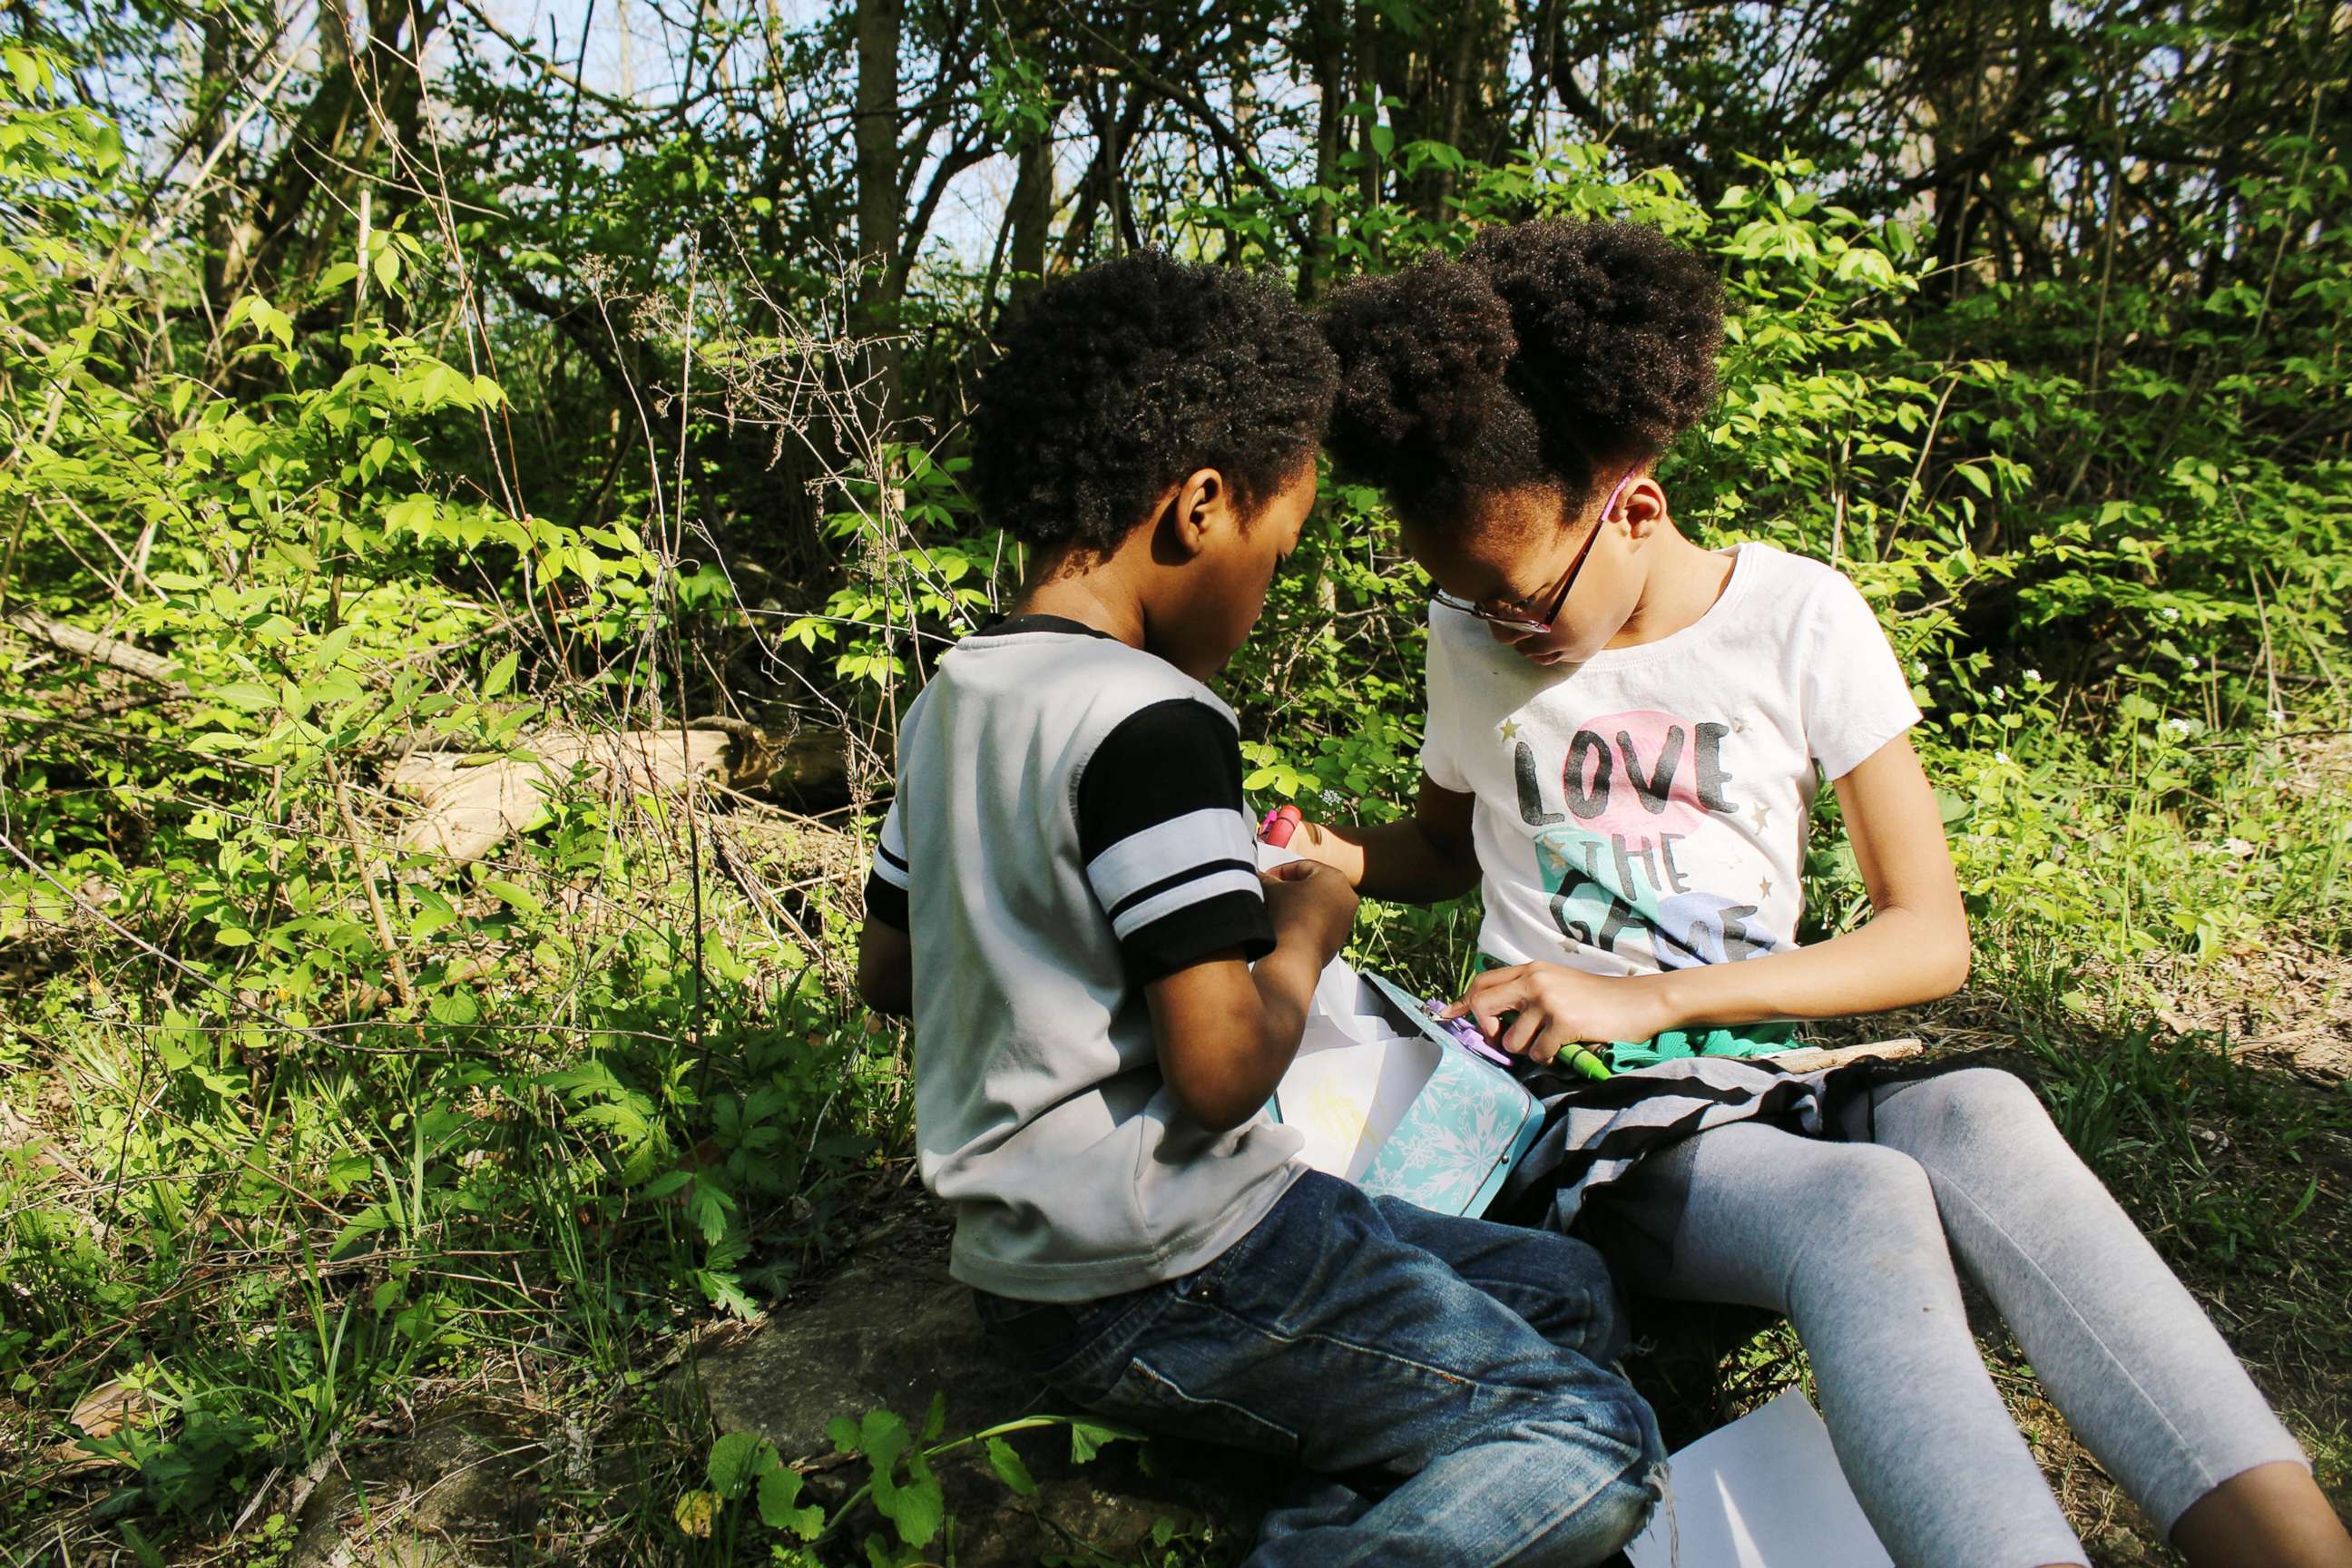 PHOTO: Samuel White, 7, and Ava White, 10, study together in the outdoors.